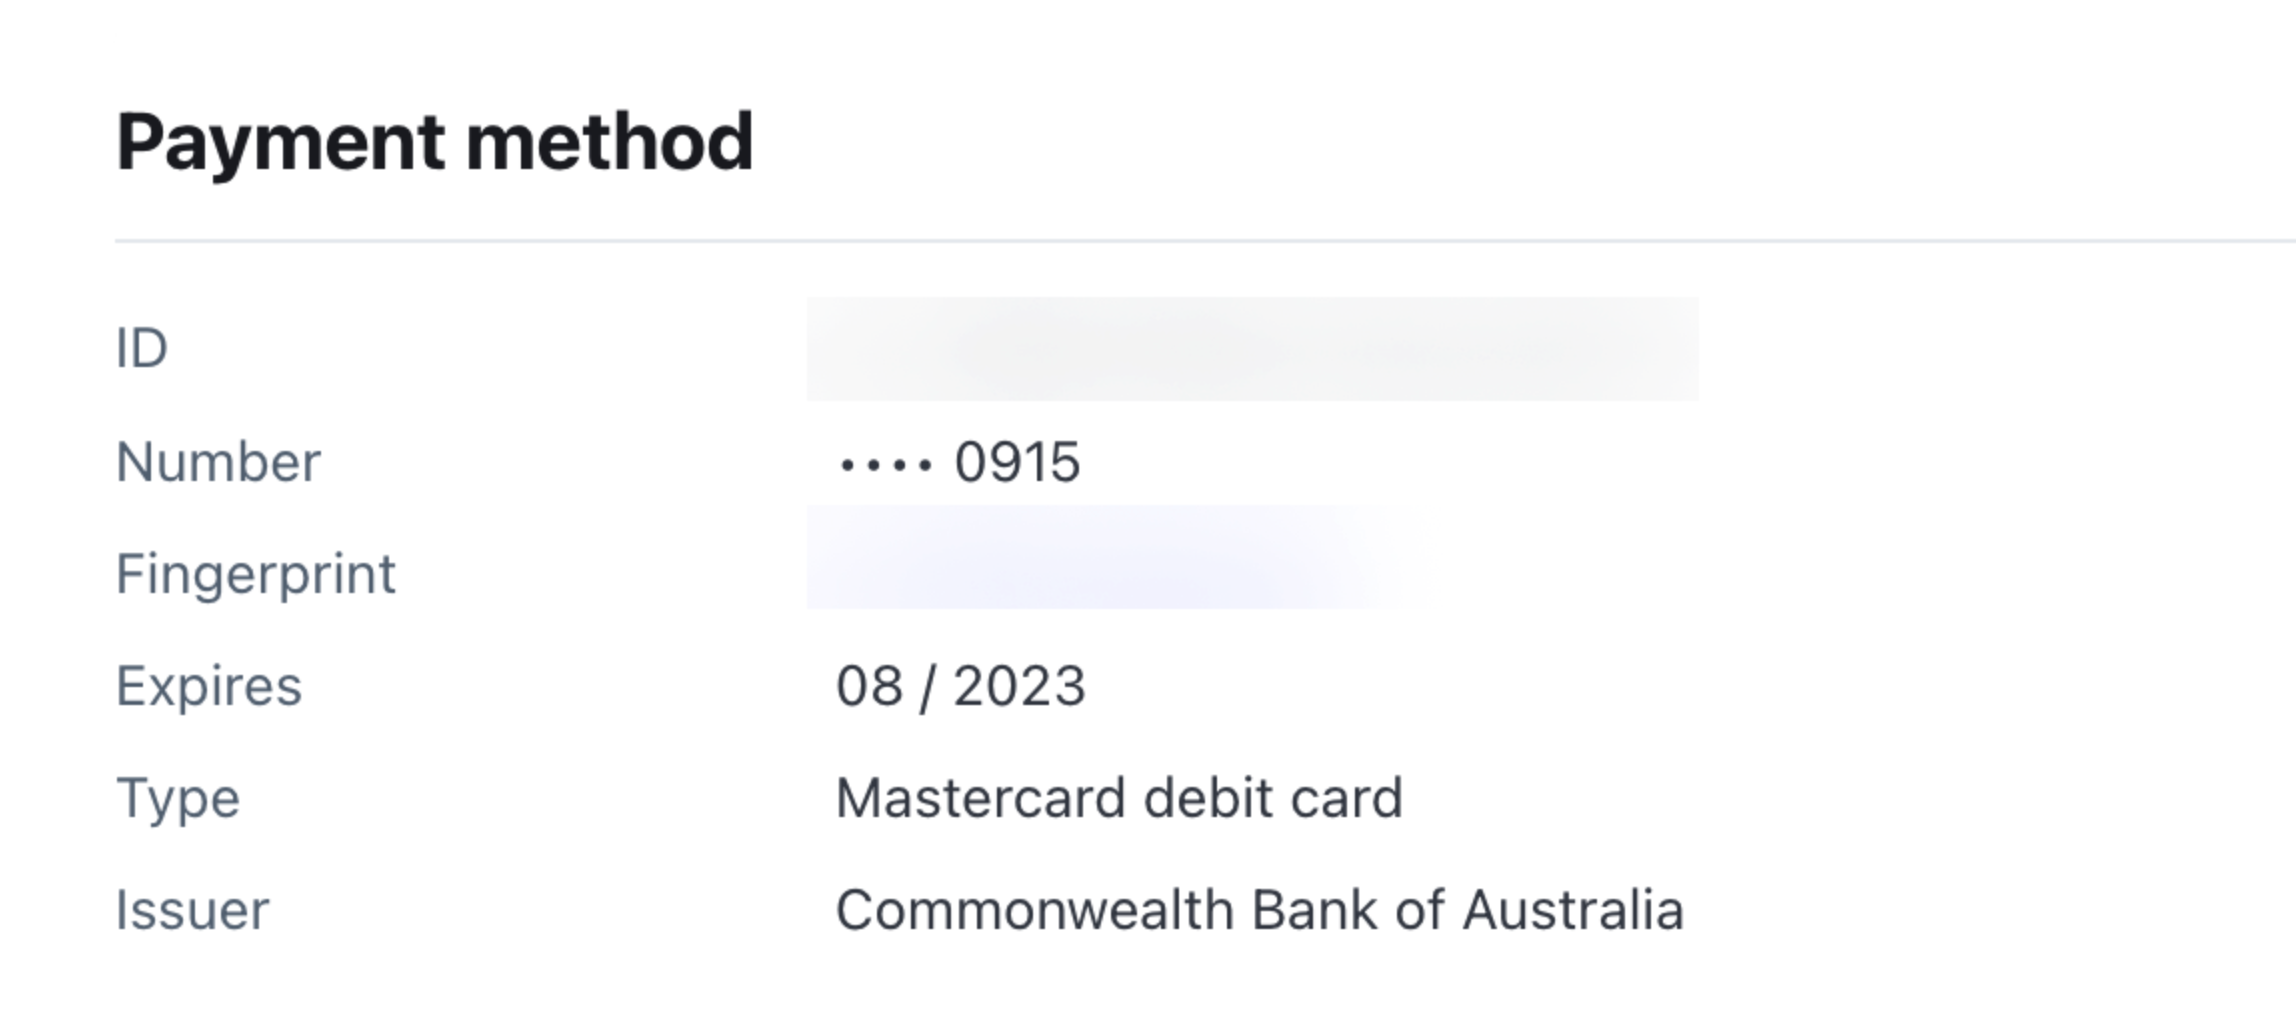 Clicking into the payment shows the issuer, in this case "Commonwealth Bank of Australia"